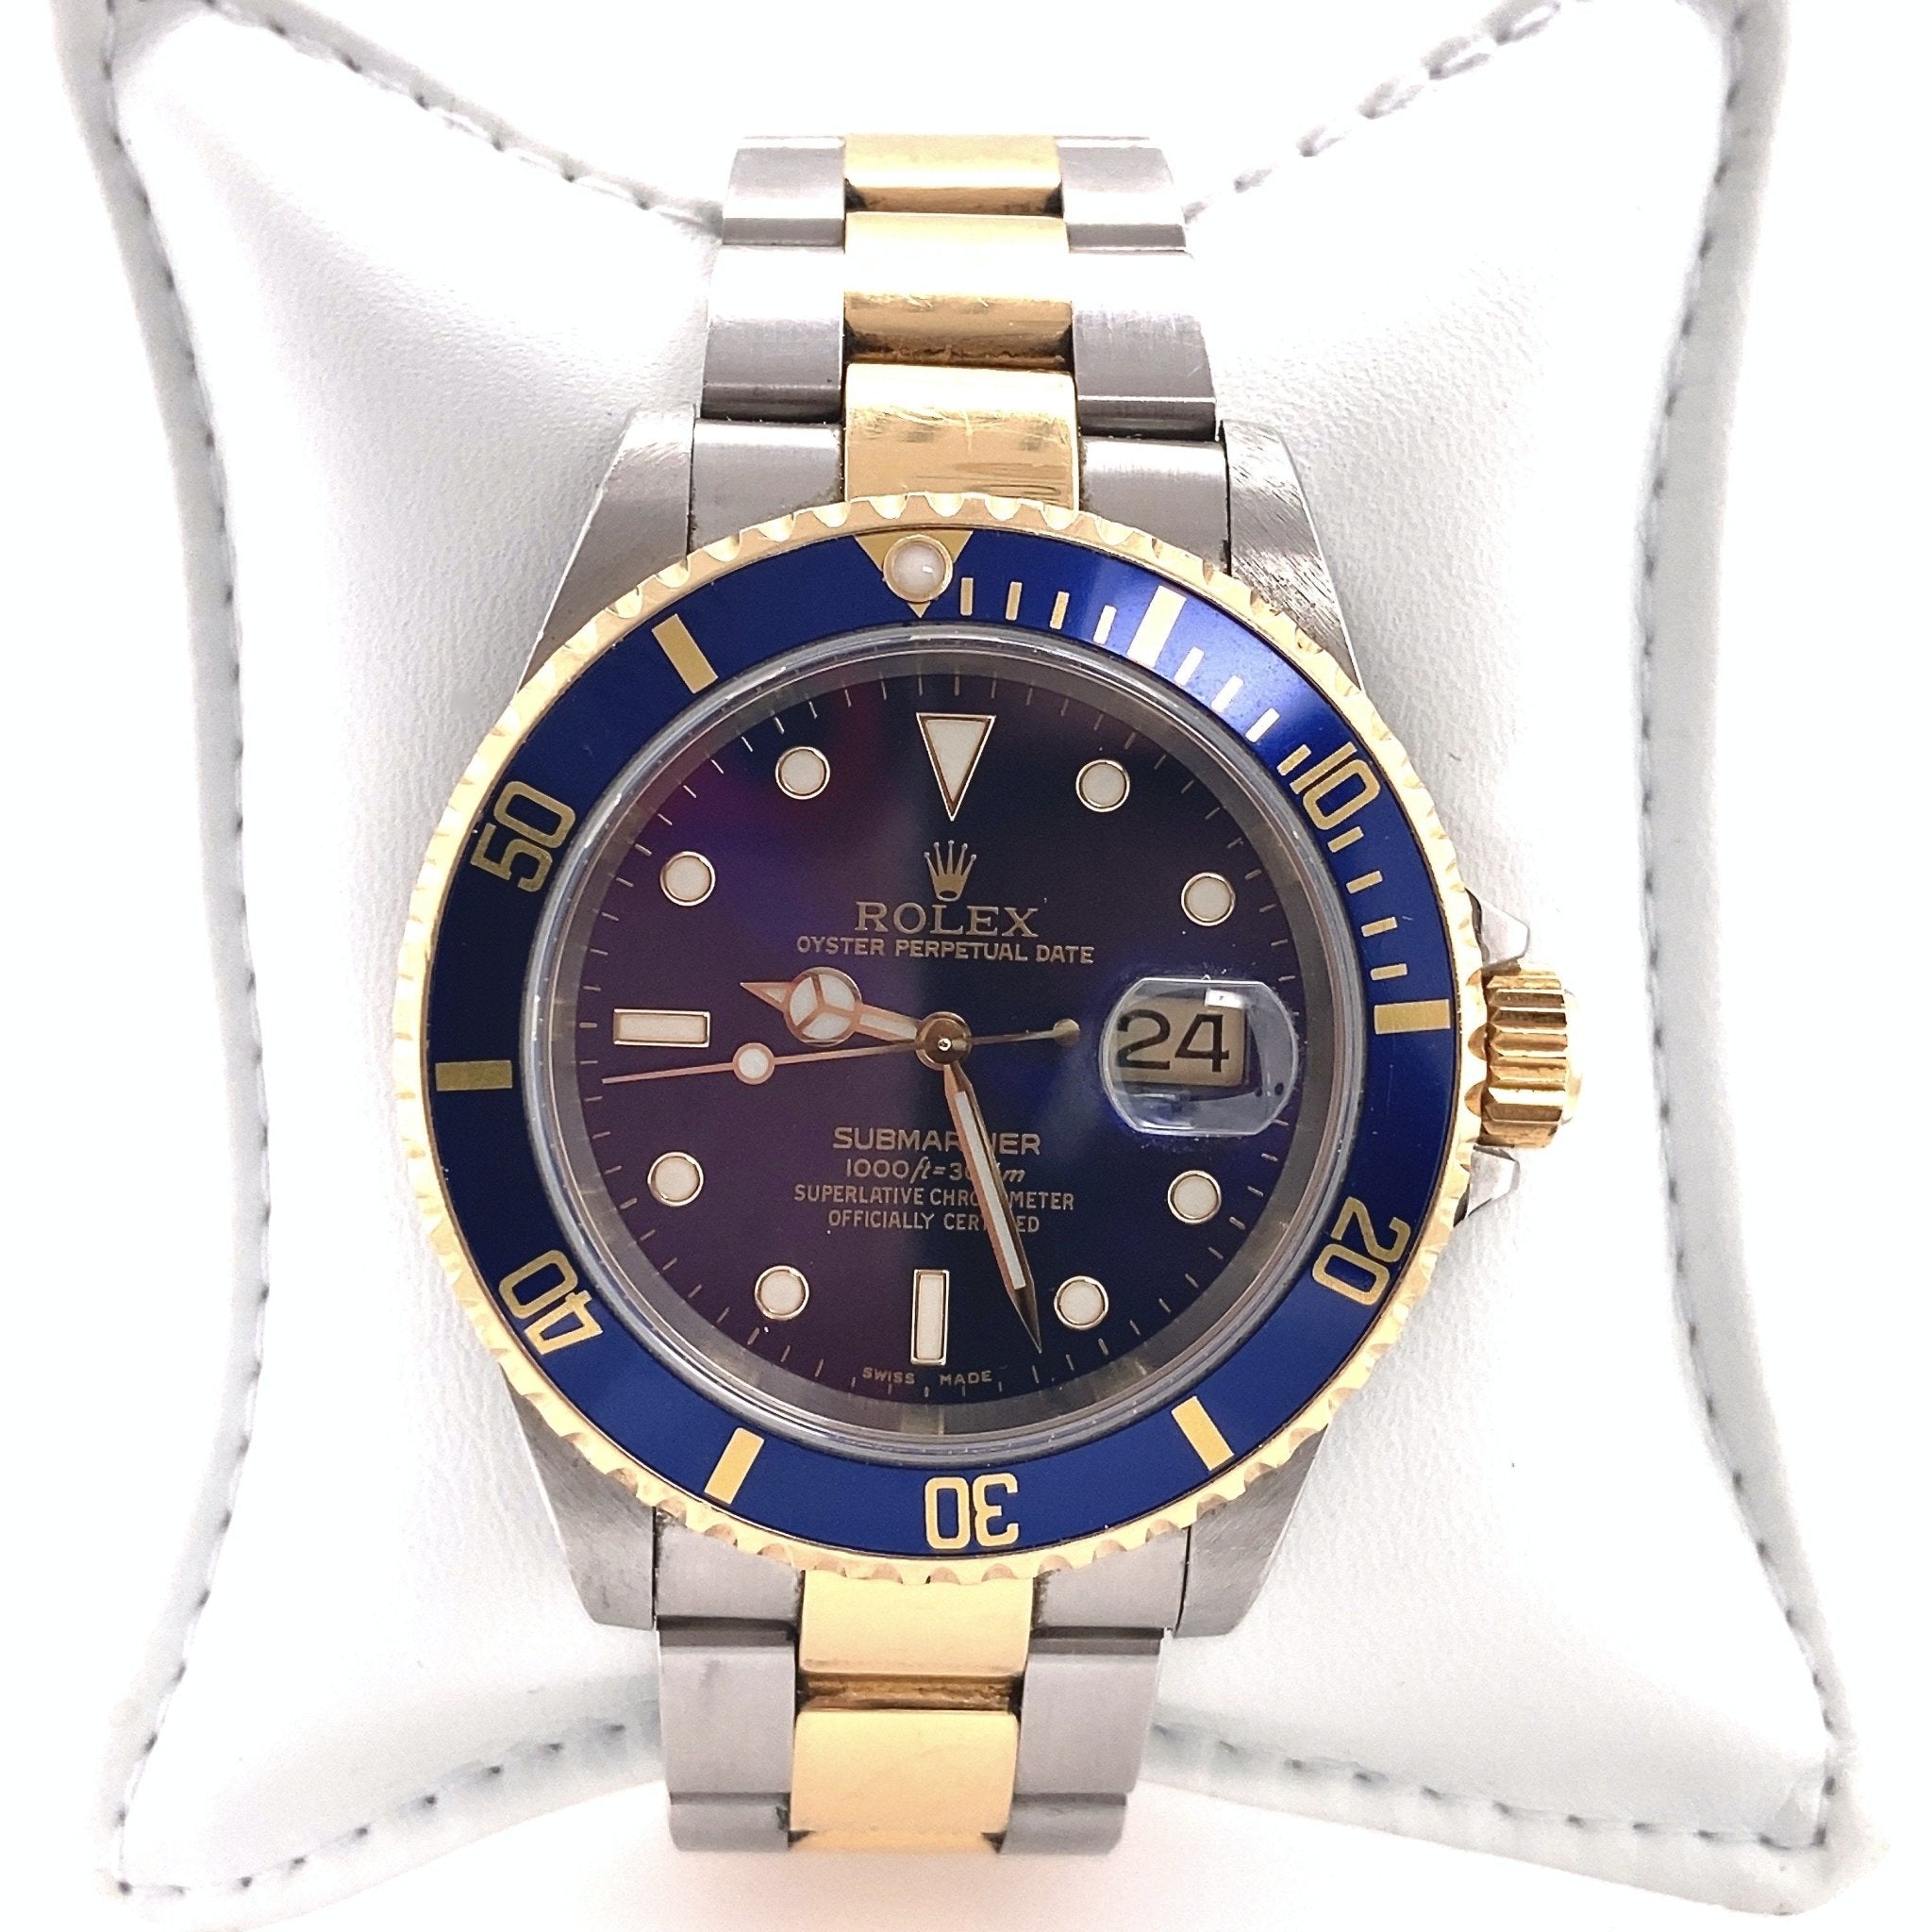 Order Rolex Submariner Dual Tone Green Dial High Quality Swiss